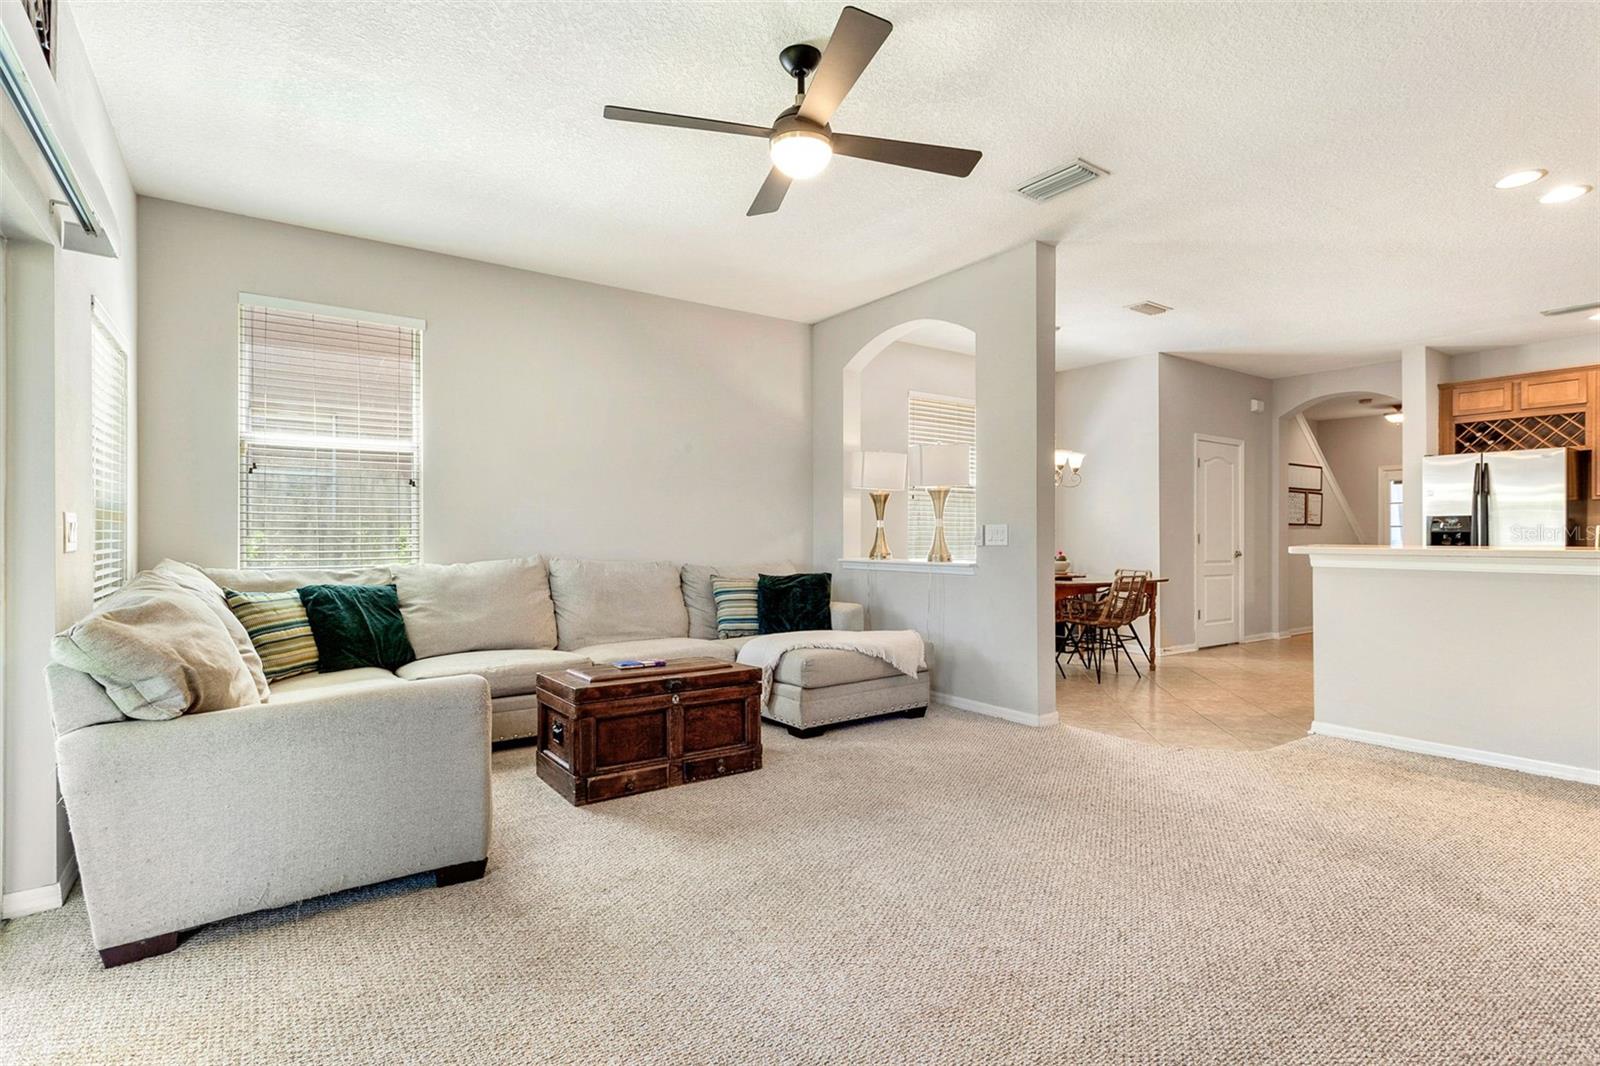 Living Room with newer ceiling fan